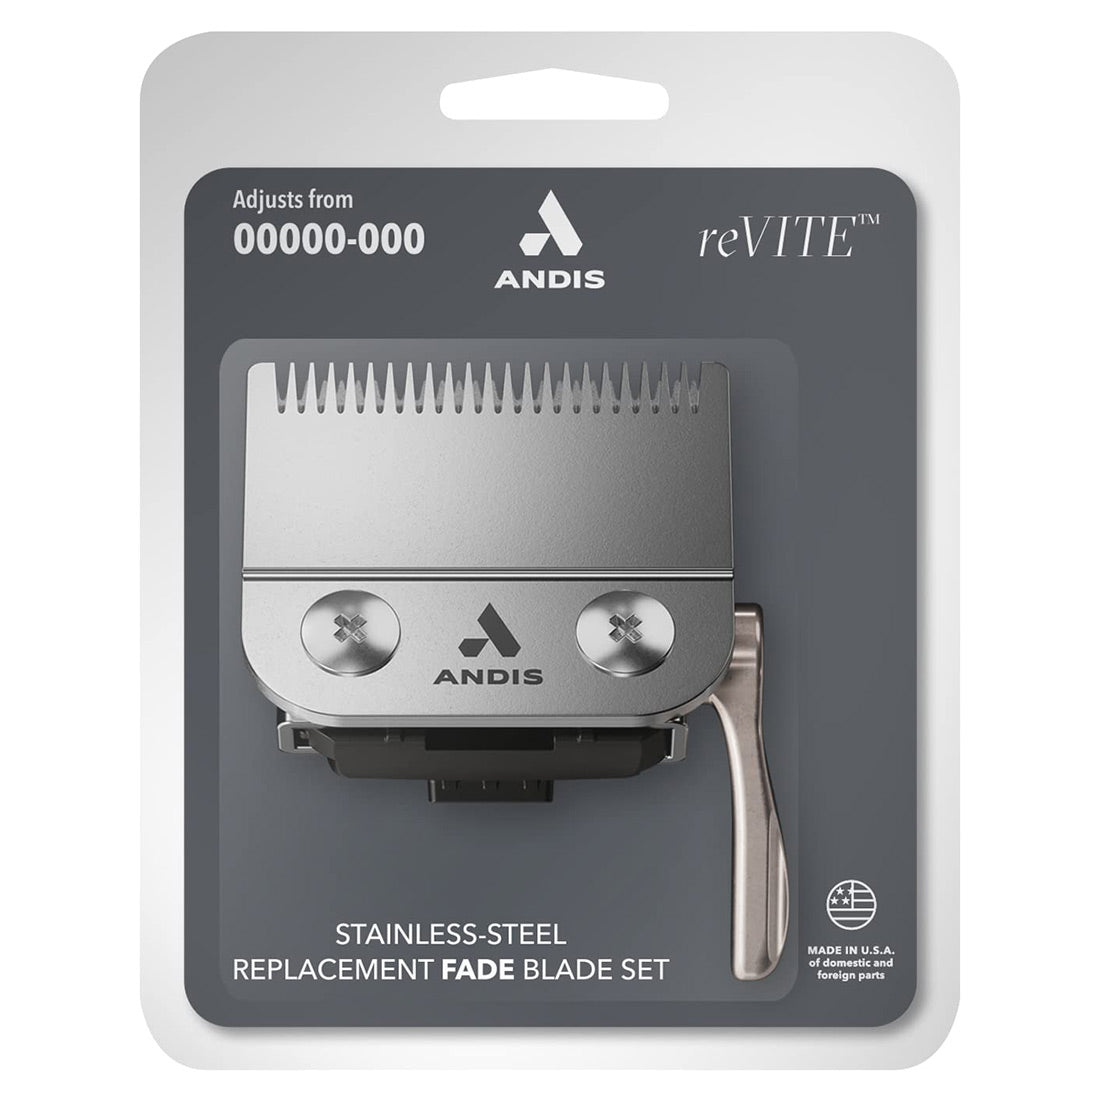 Andis Fade Replacement Blade reVITE Black #86015 in Package